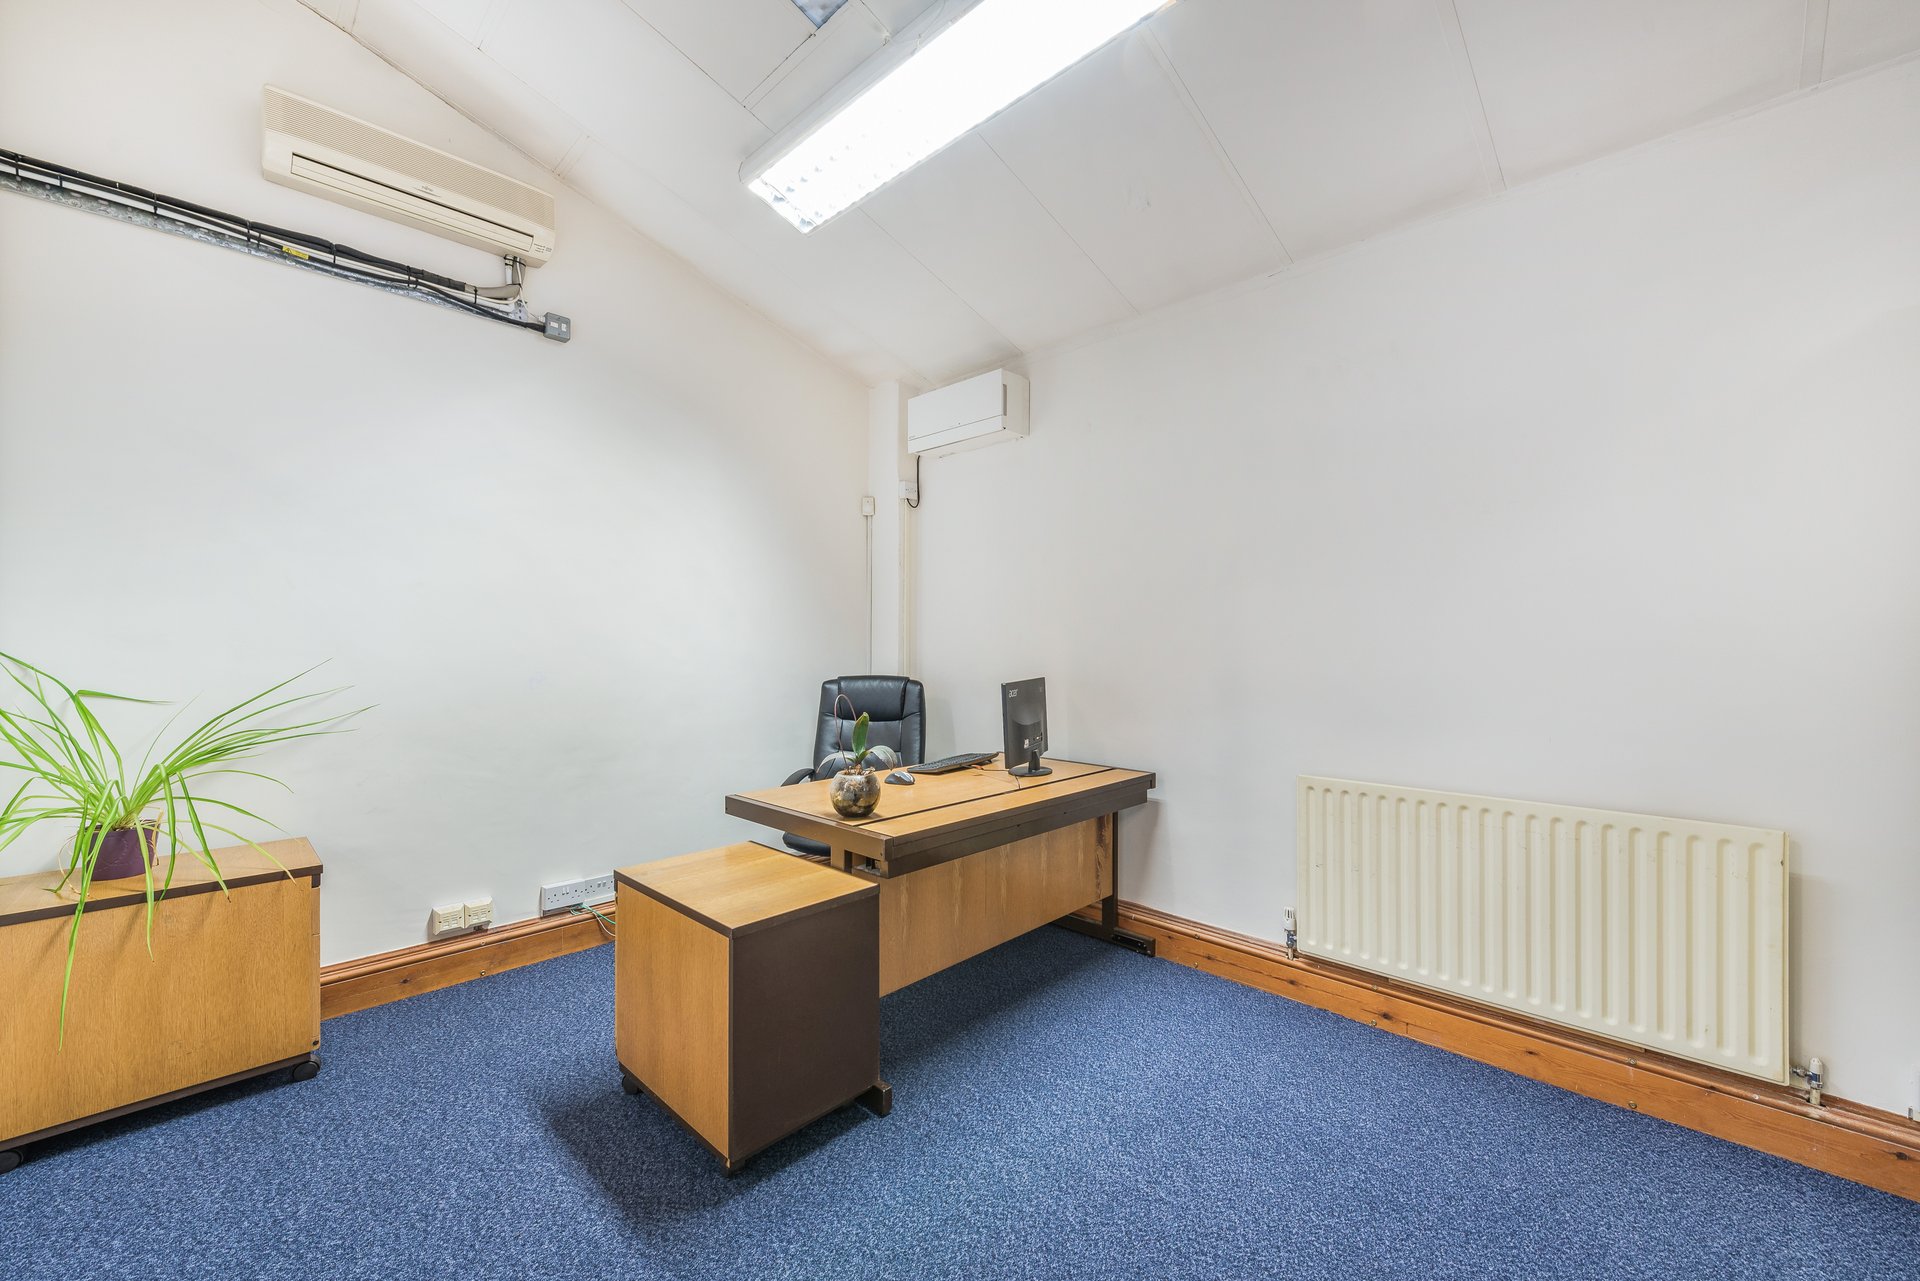 Balham Clapham Shared Office Co-working beltere